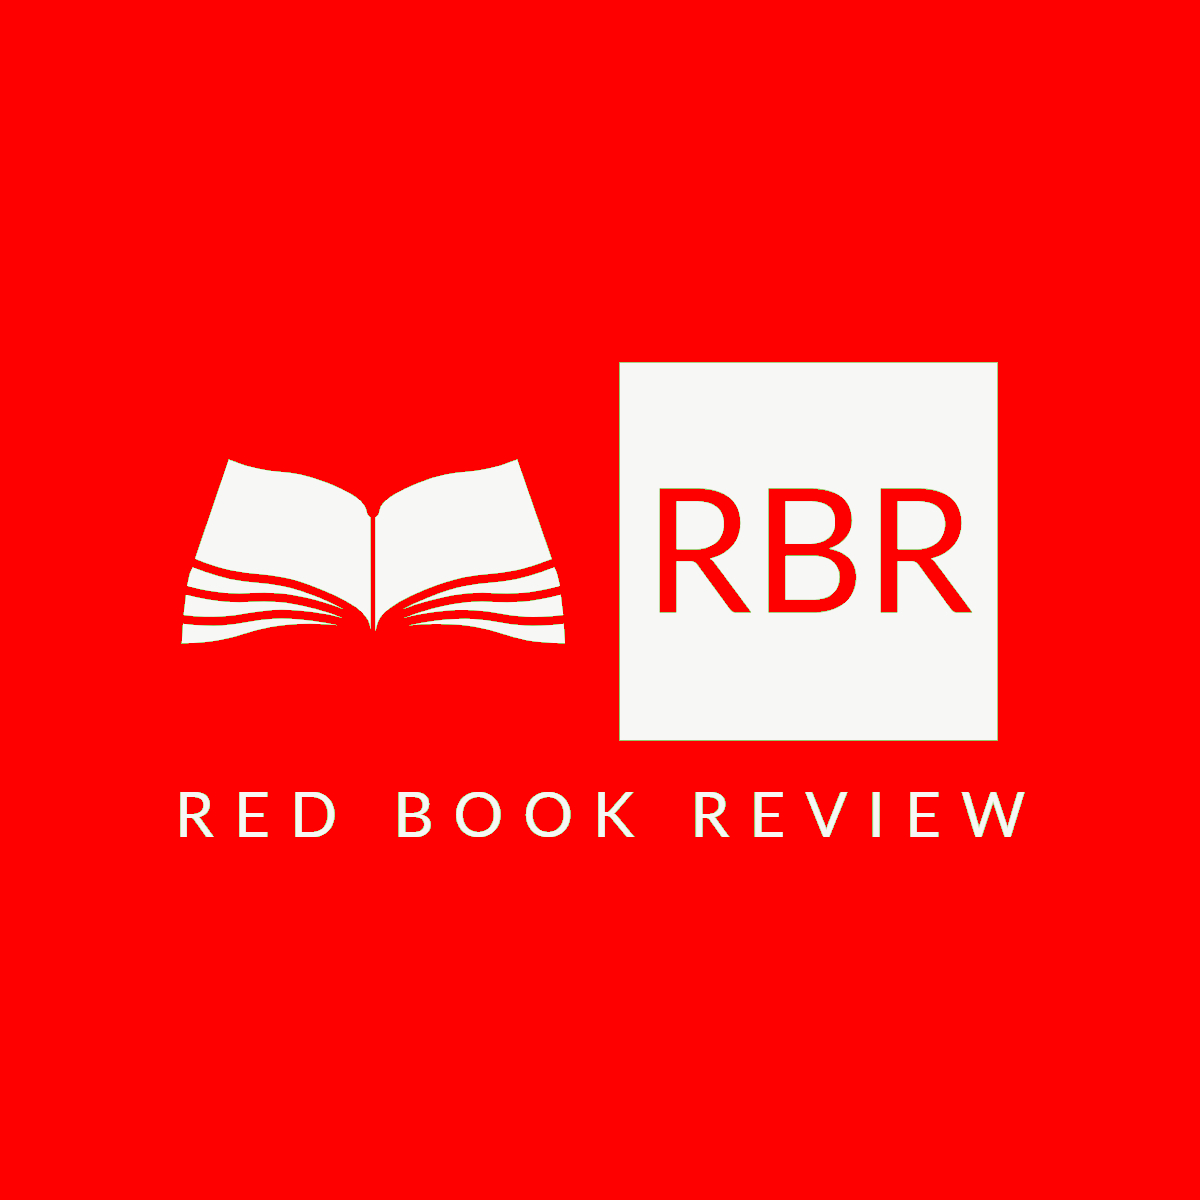 Red Book Review Logo